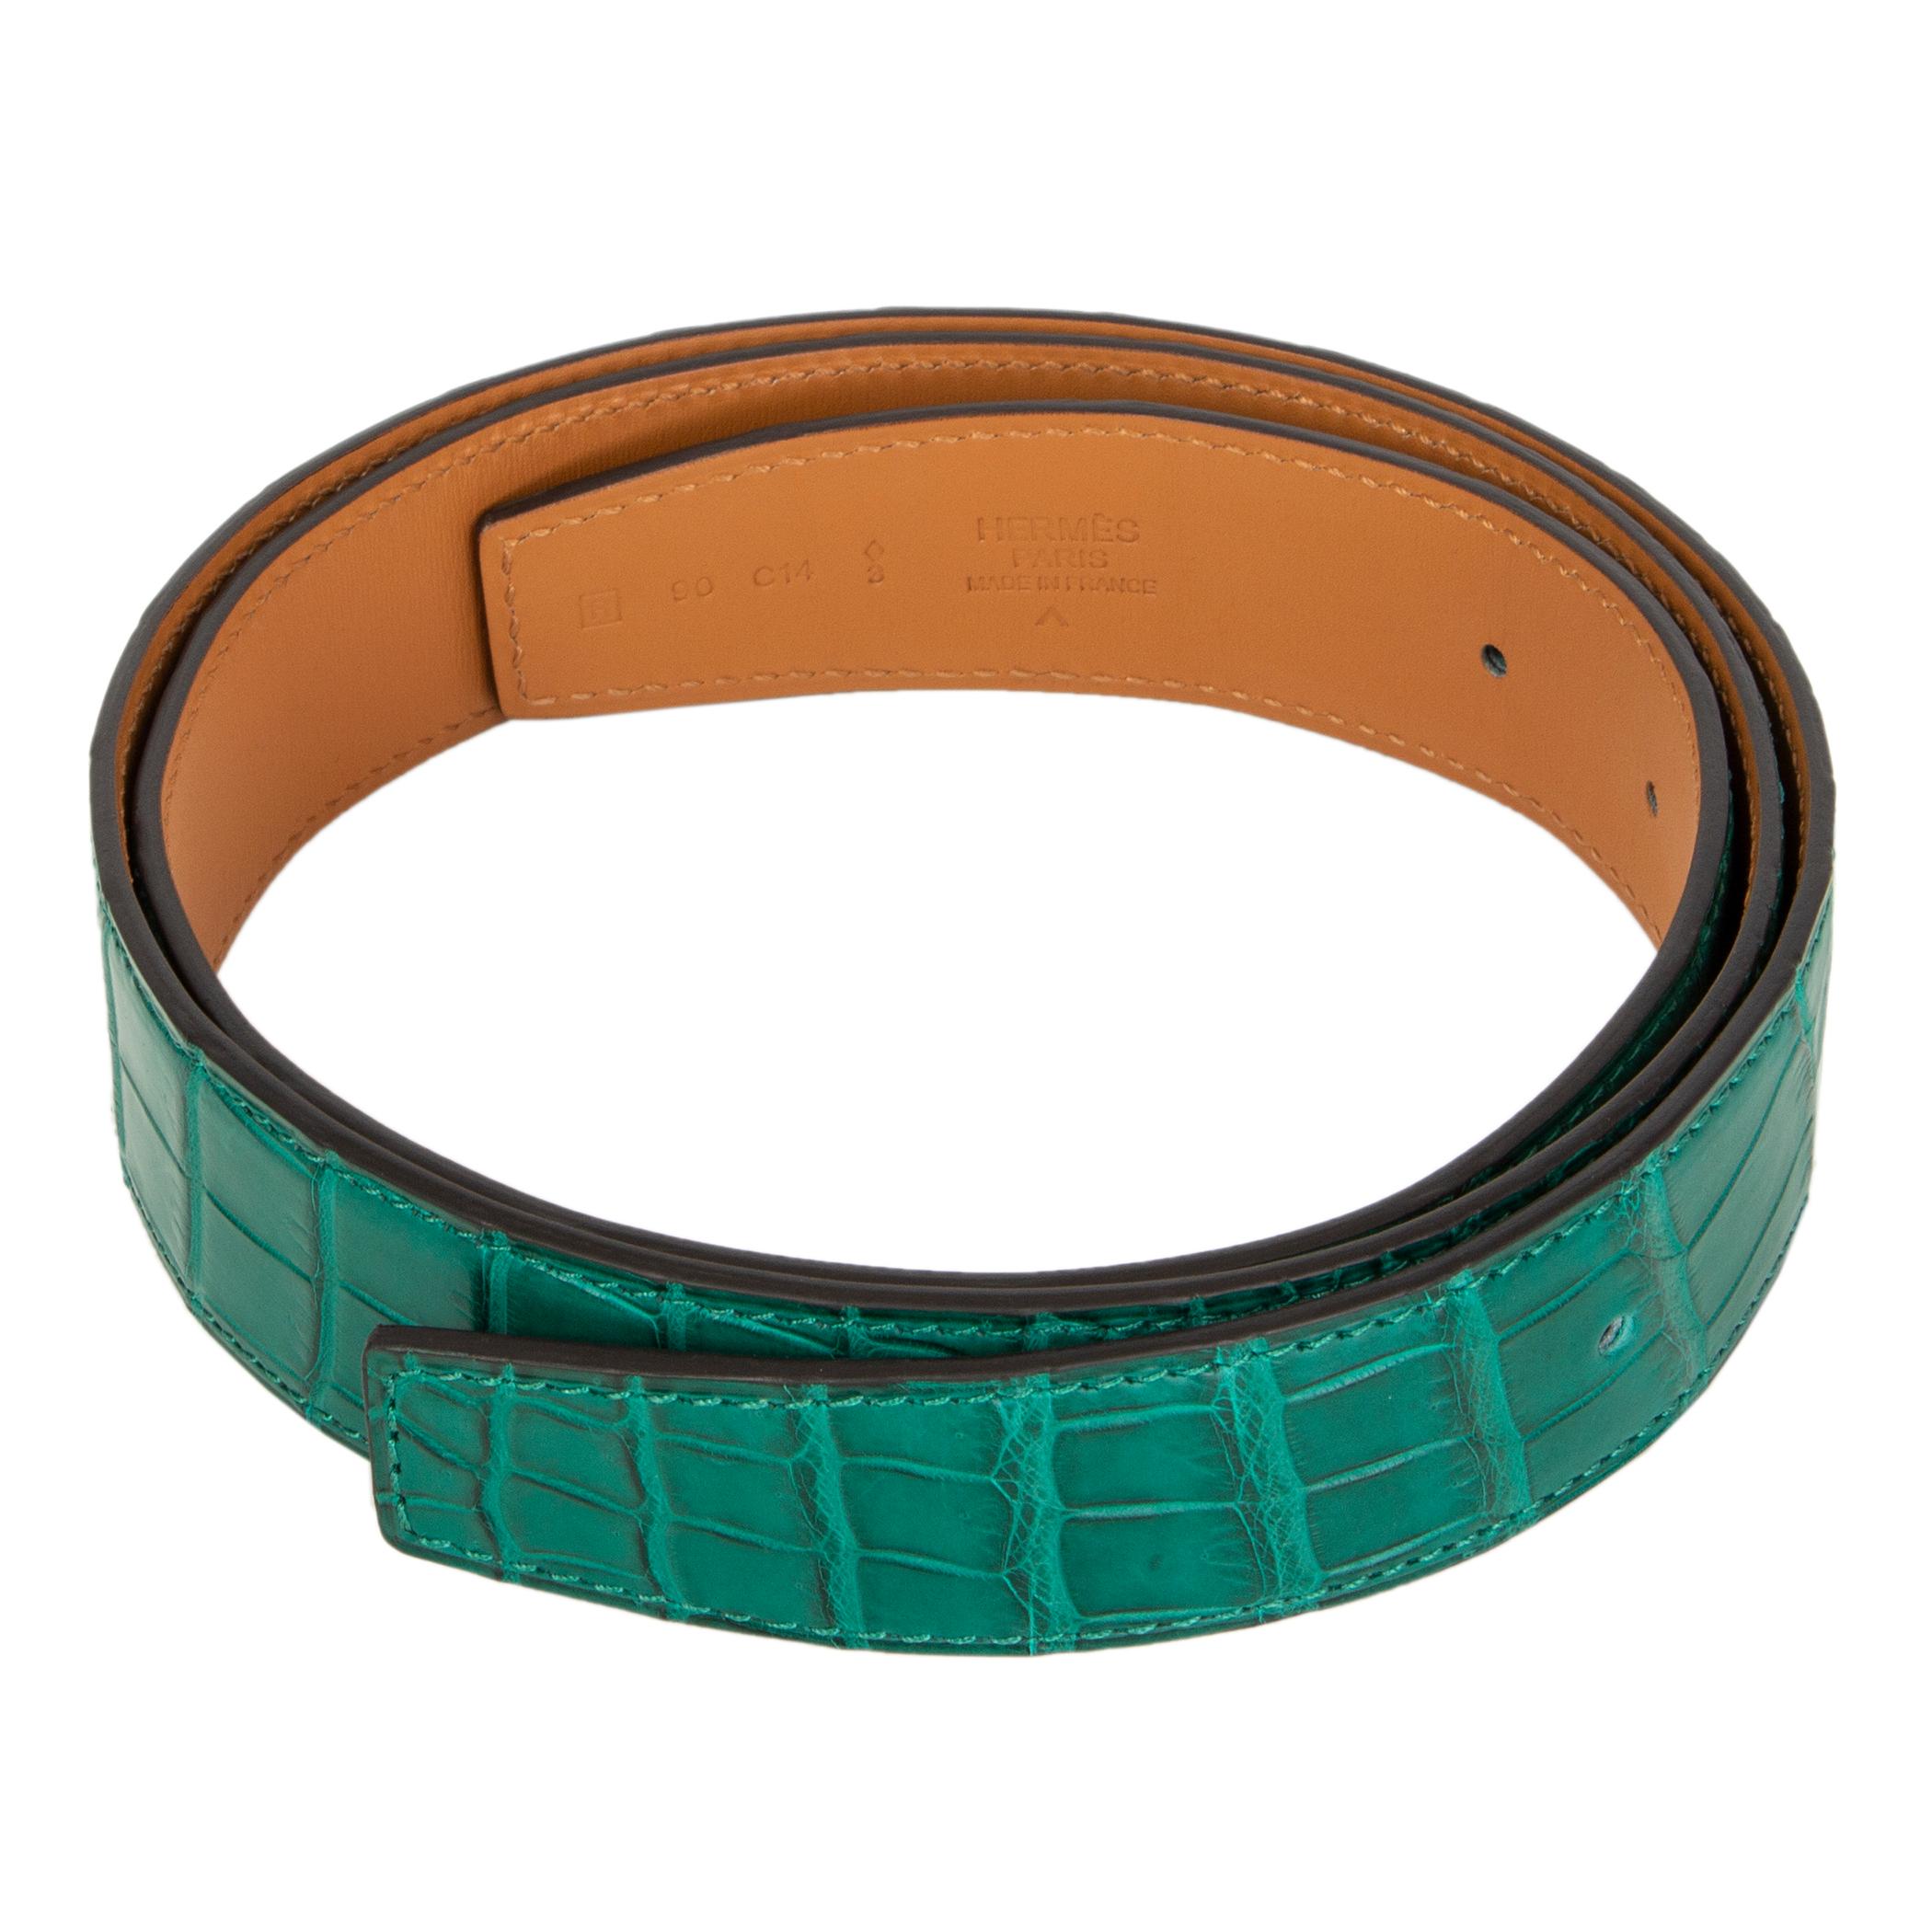 Hermes 32mm belt strap in Malachite (green) Shiny Porosus crocodile. Brand new. Comes with box and CITES.

Measurements
Tag Size	90
Width	3.2cm (1.2in)
Fits	88cm (34.3in) to 92cm (35.9in)
